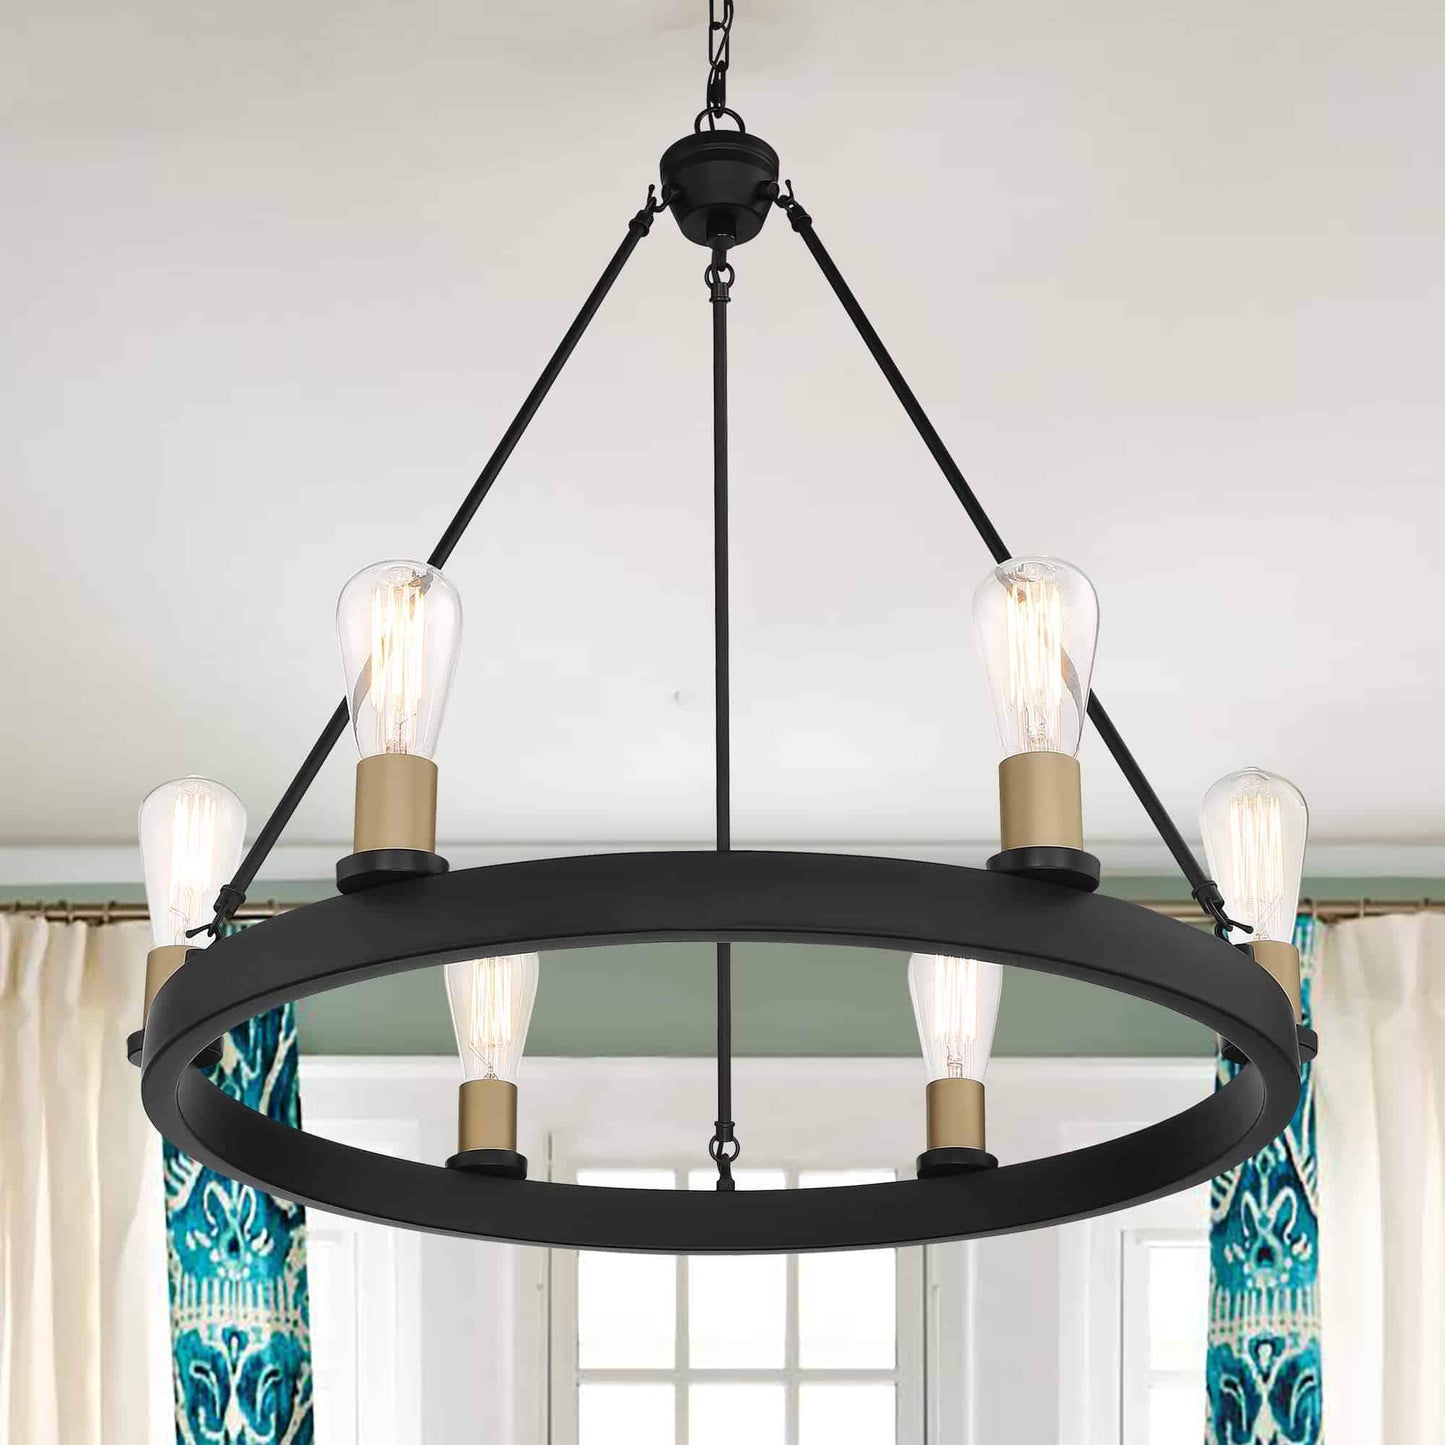 6 light wagon wheel chandelier (18) by ACROMA